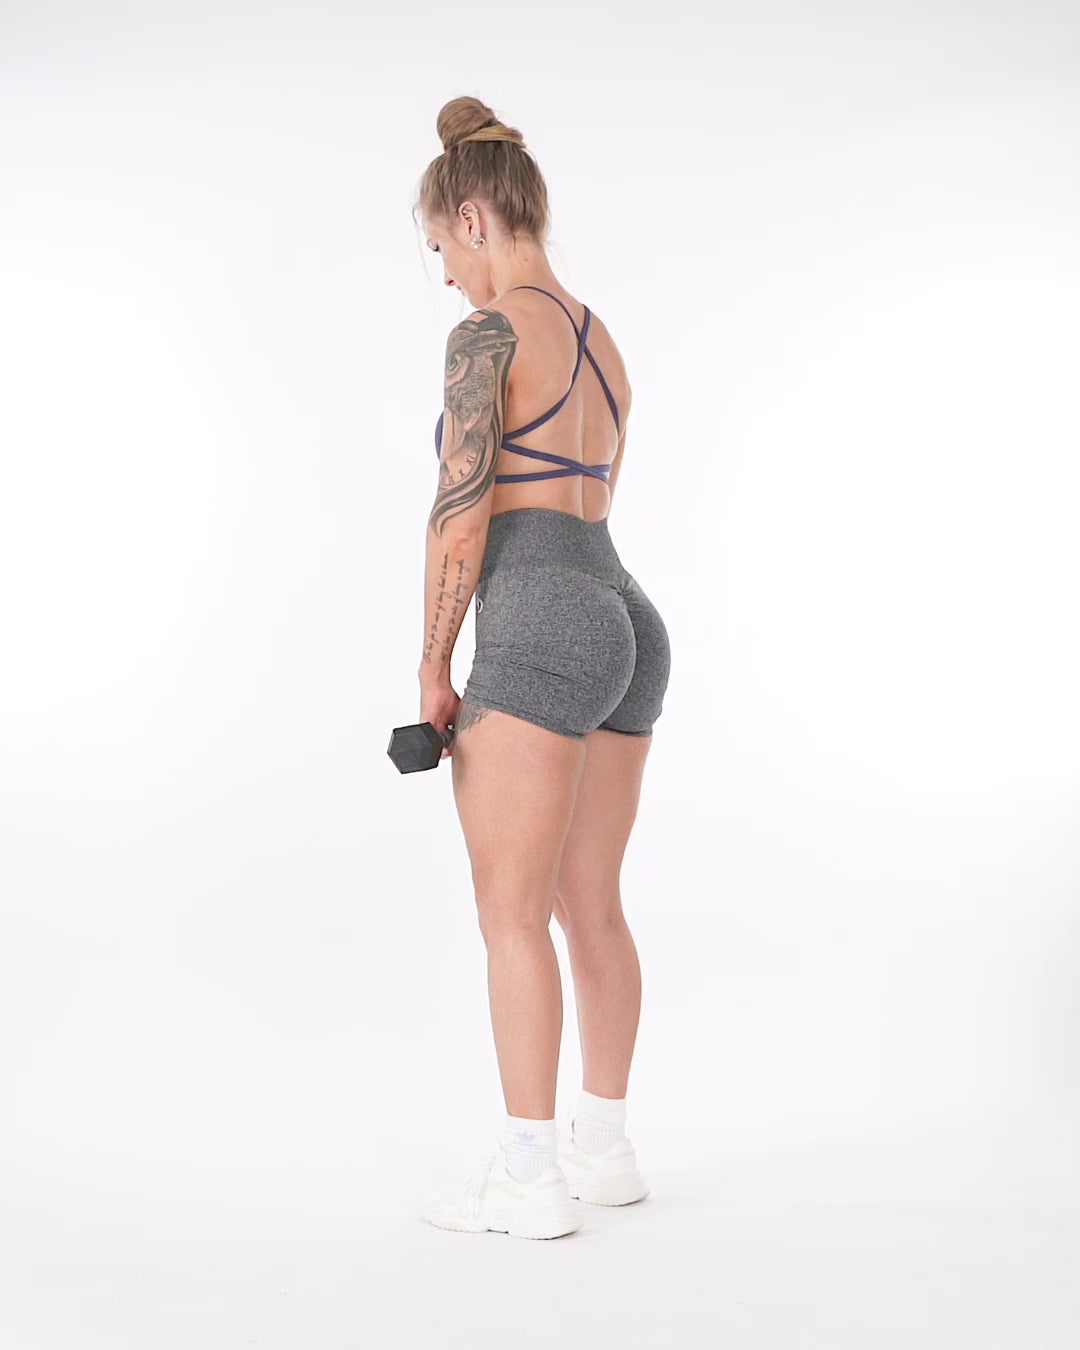 A model wears Wimble-Bum shorts created by Direct Line to fix the